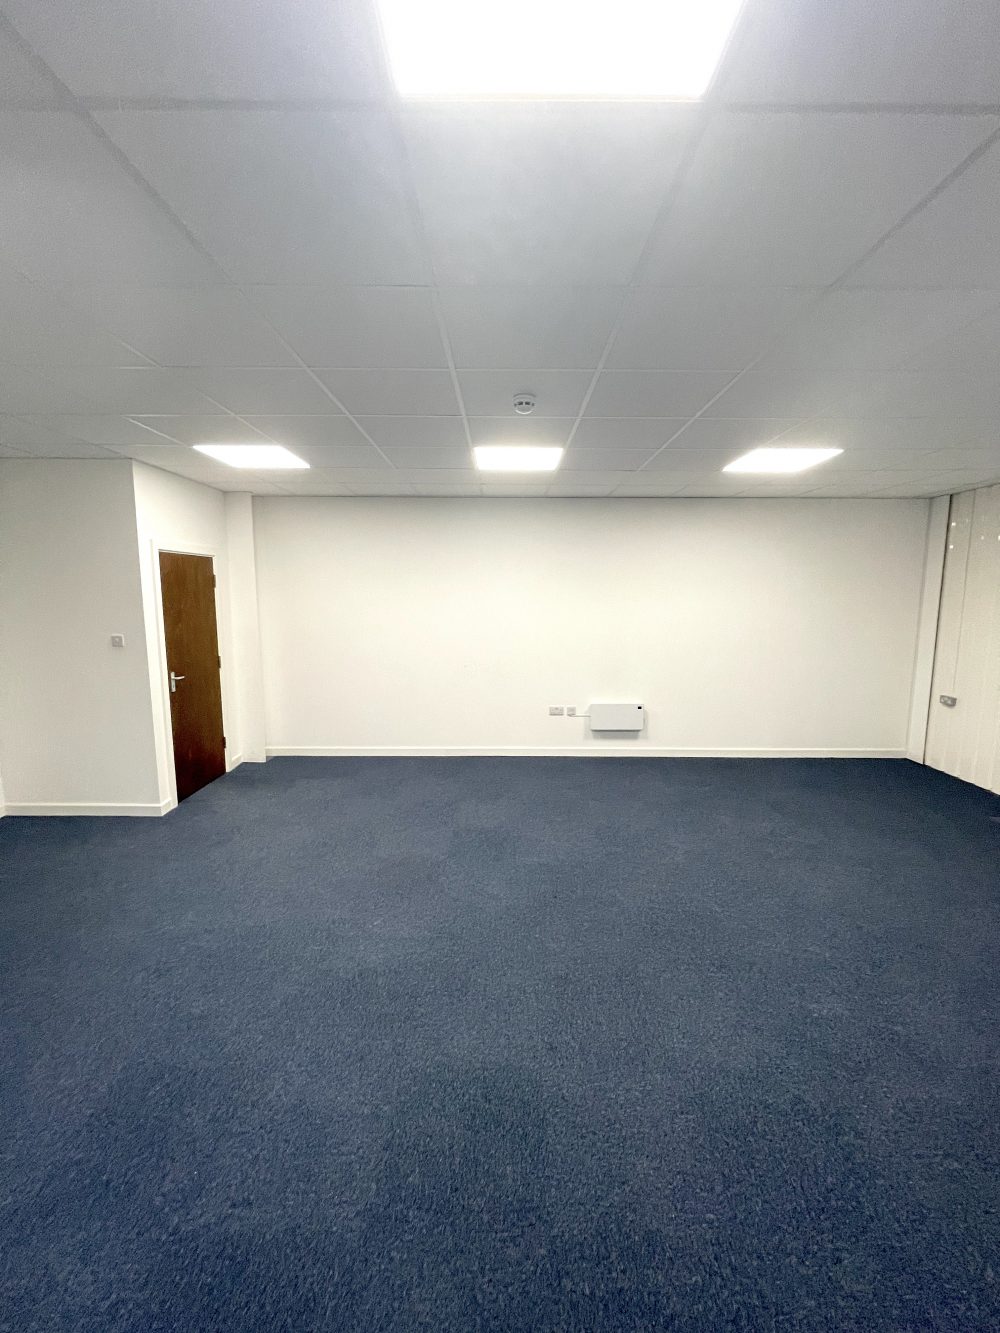 First floor office space : light idustrial creative artist studio to rent in E18 S South Woodford Pic 12